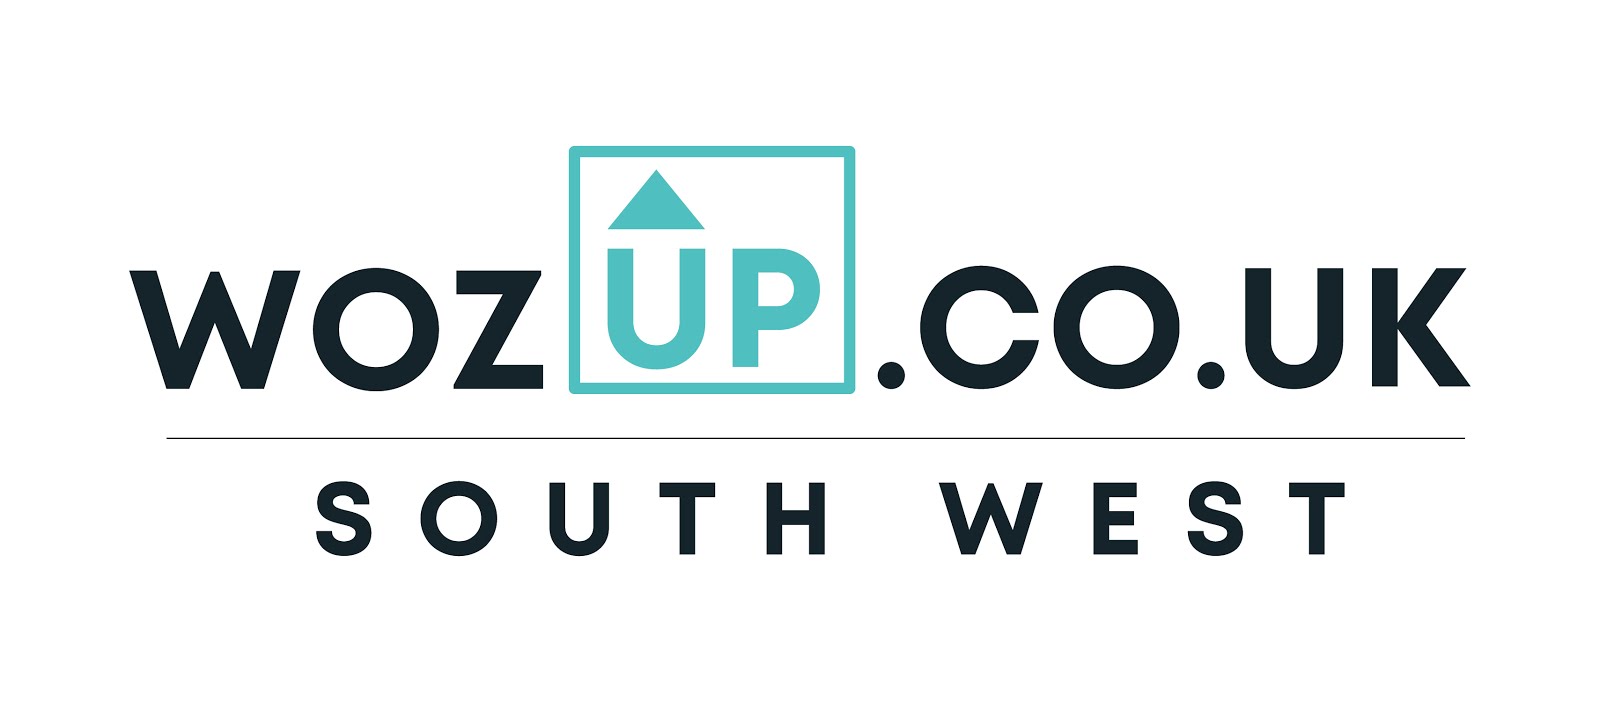 Wozup South West